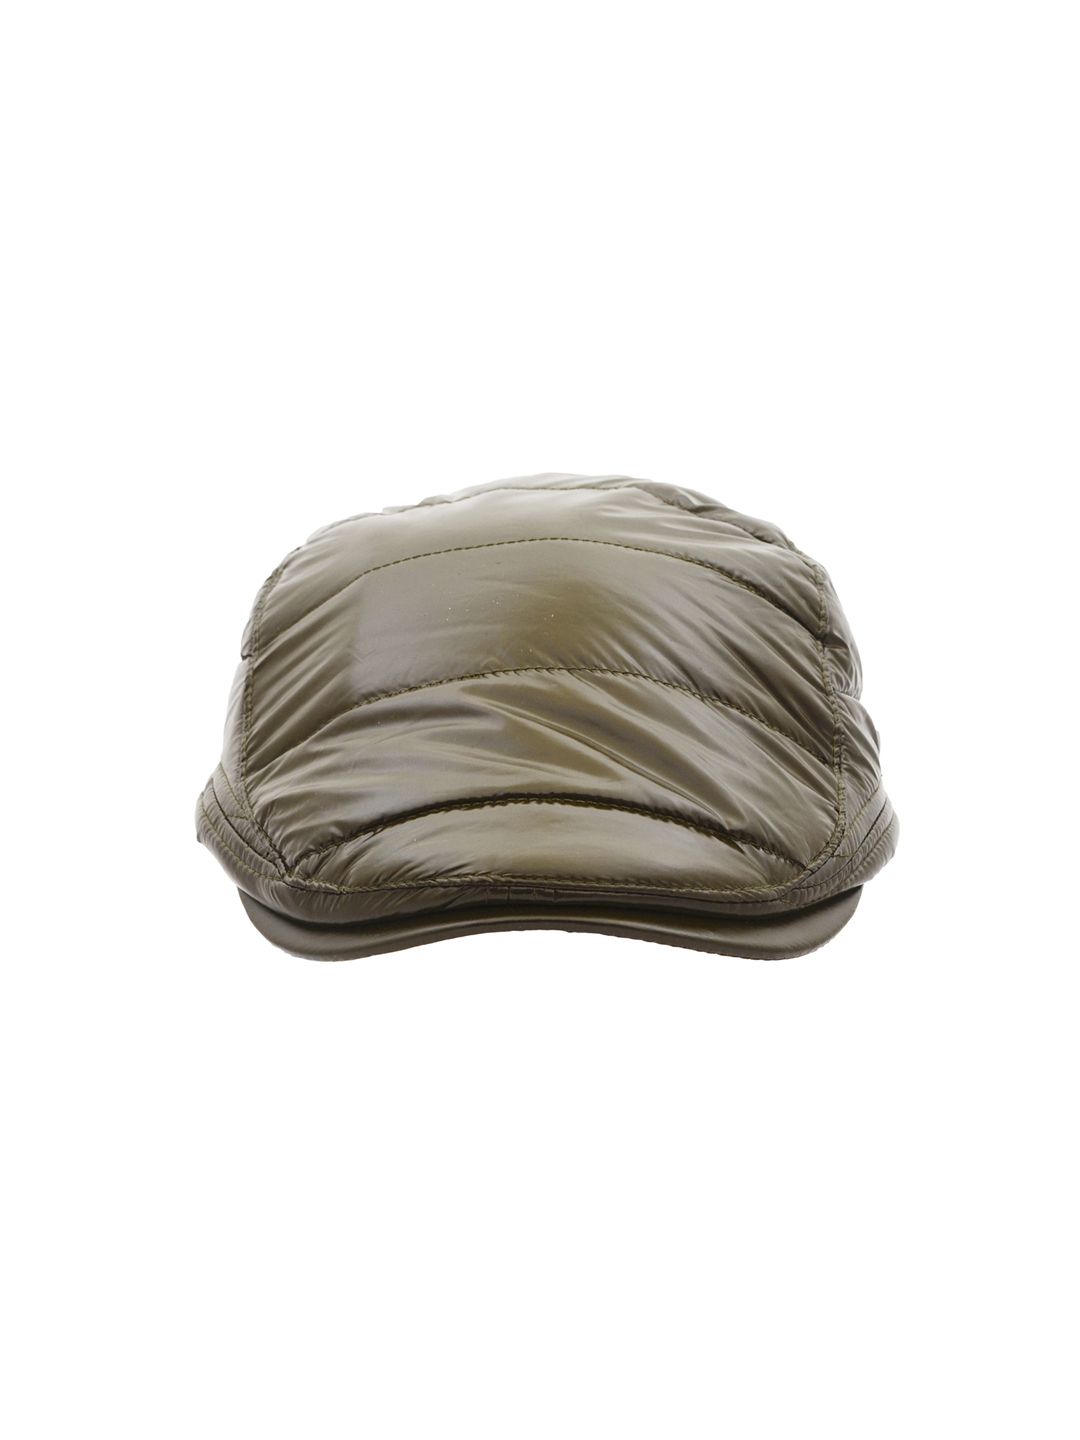 FabSeasons Unisex Olive Green Solid Ascot Cap Price in India